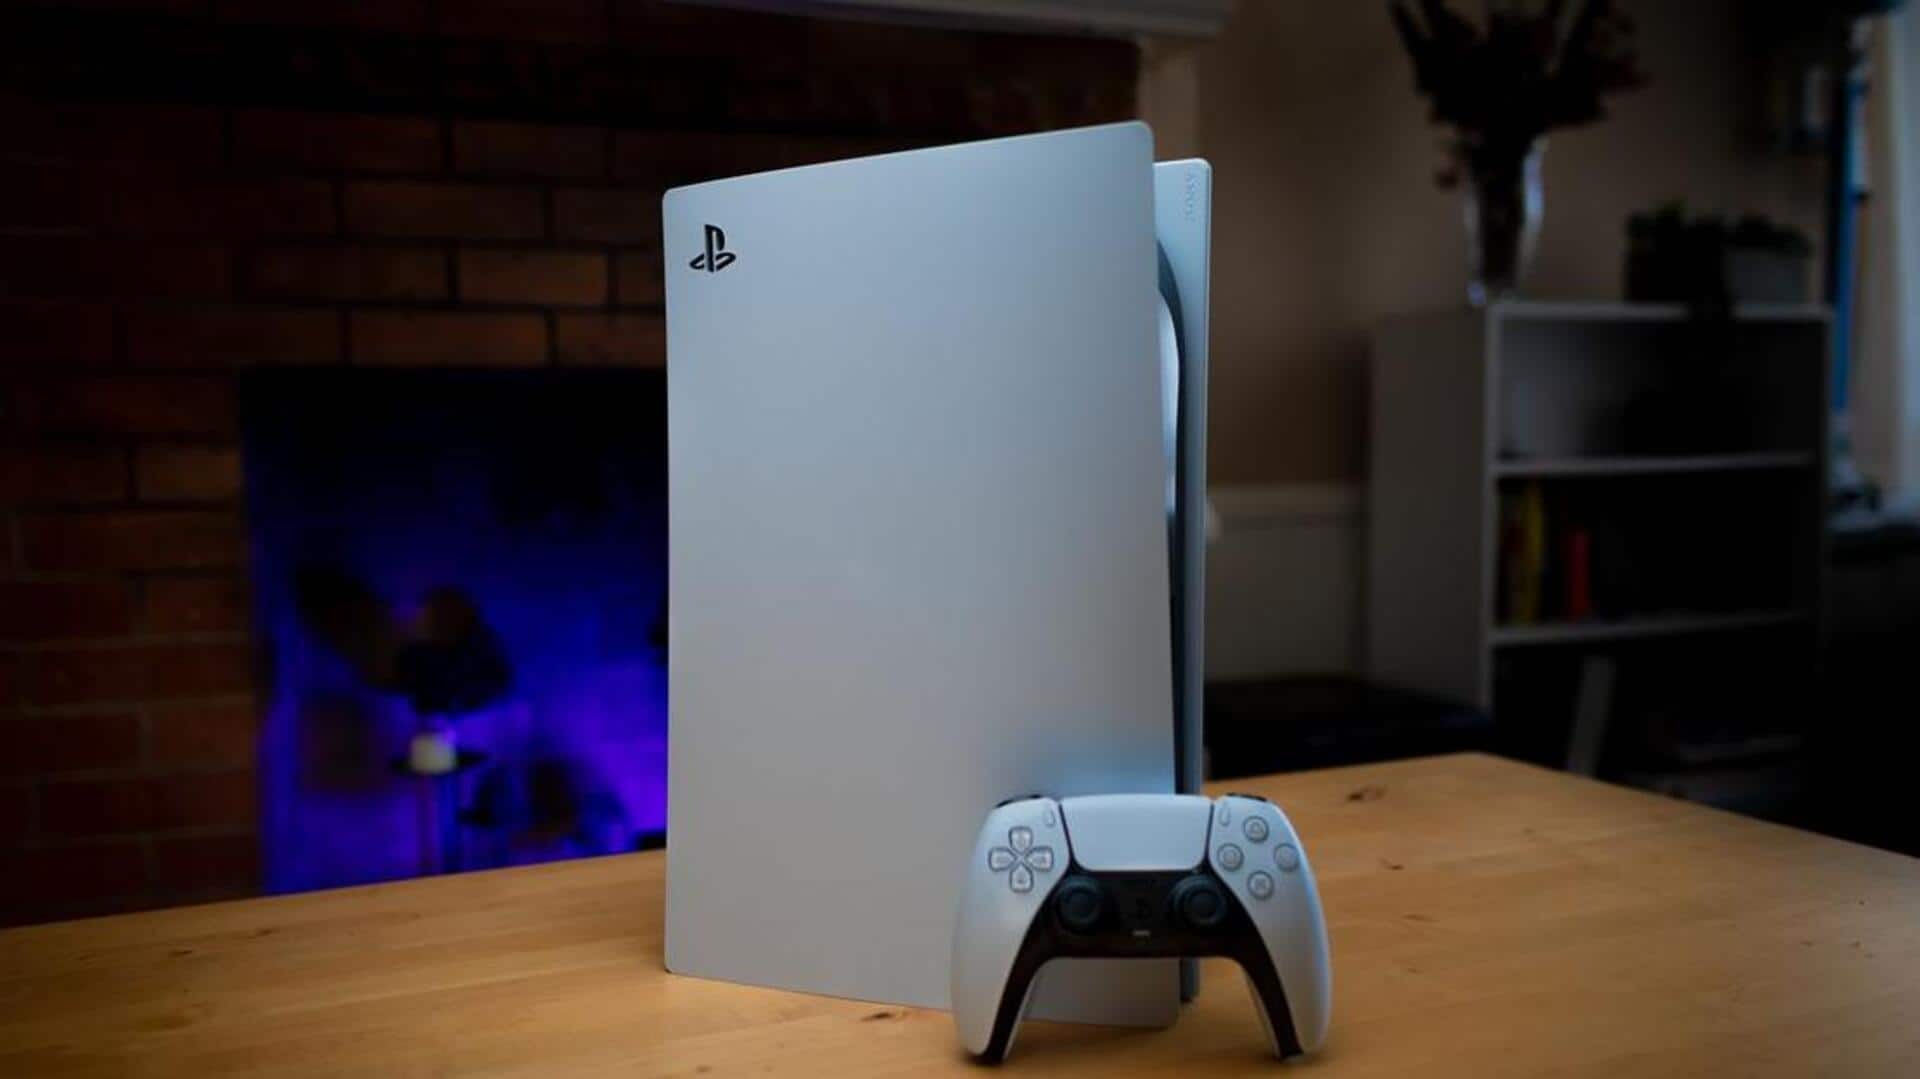 Sony PlayStation 5 Pro full specs leaked ahead of launch